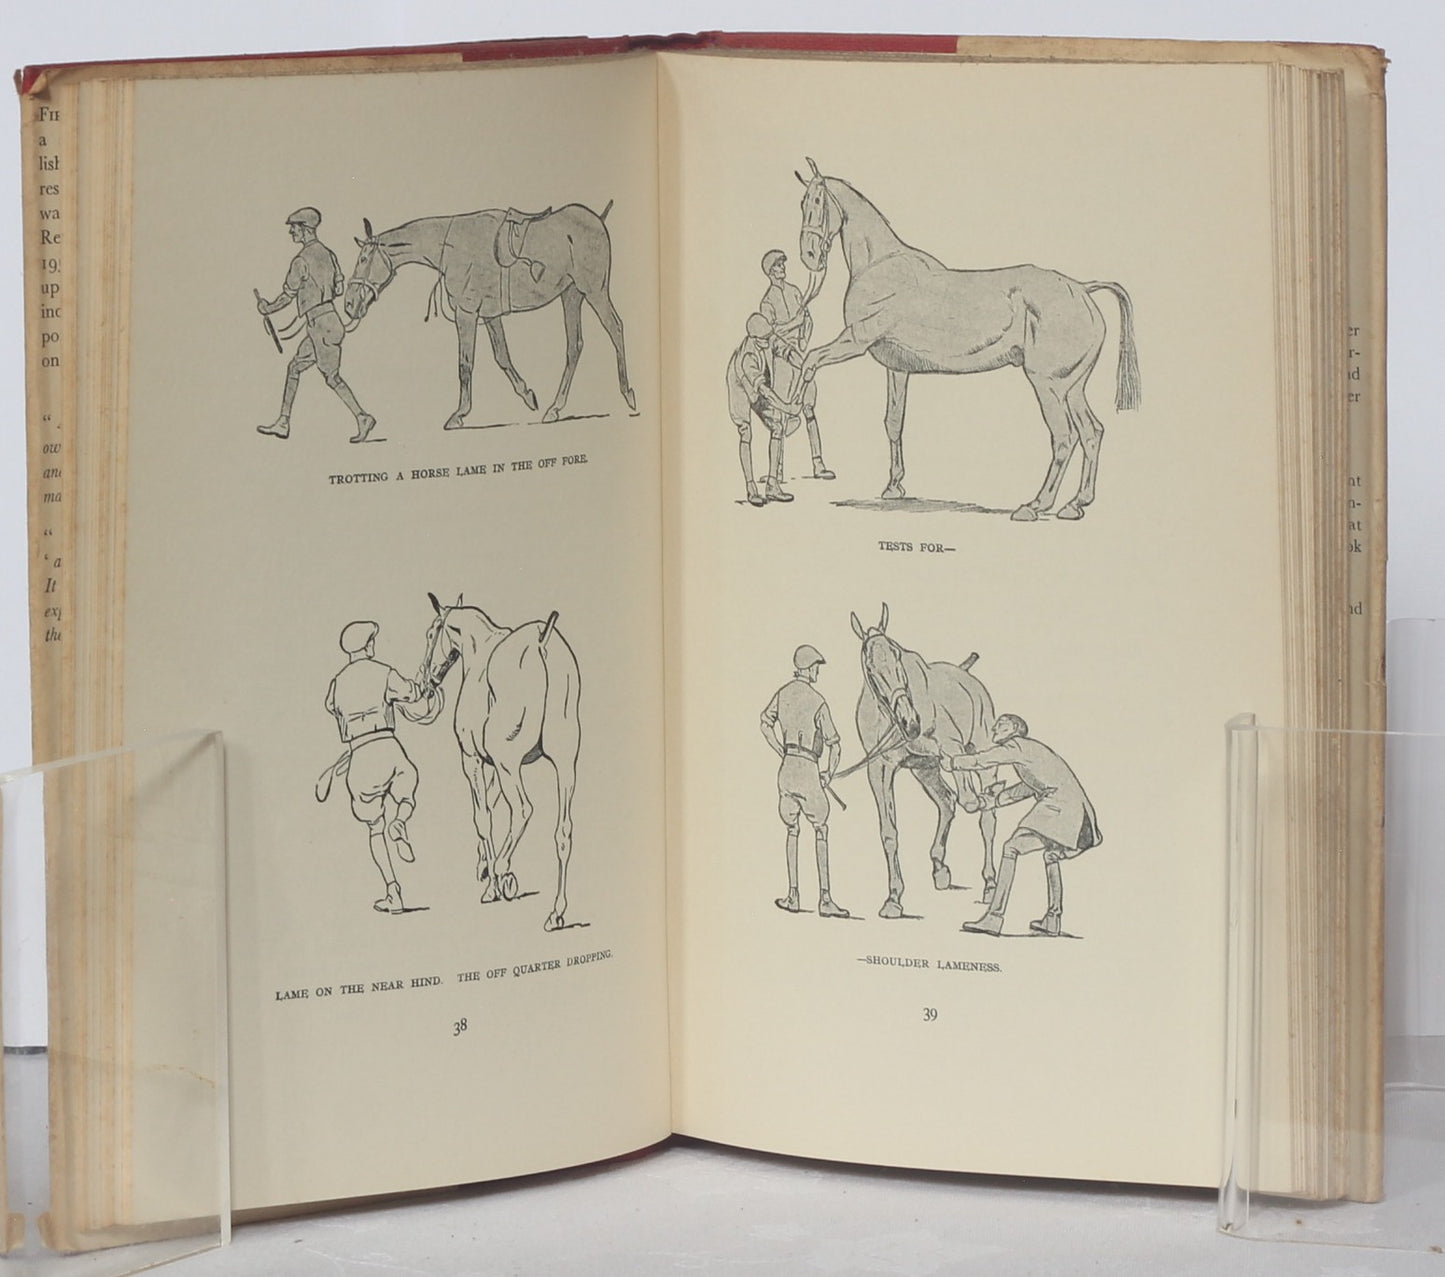 First Aid Hints for the Horse Owner, A Veterinary Note Book by Major W.E.Lyon, 1st Ed 1933